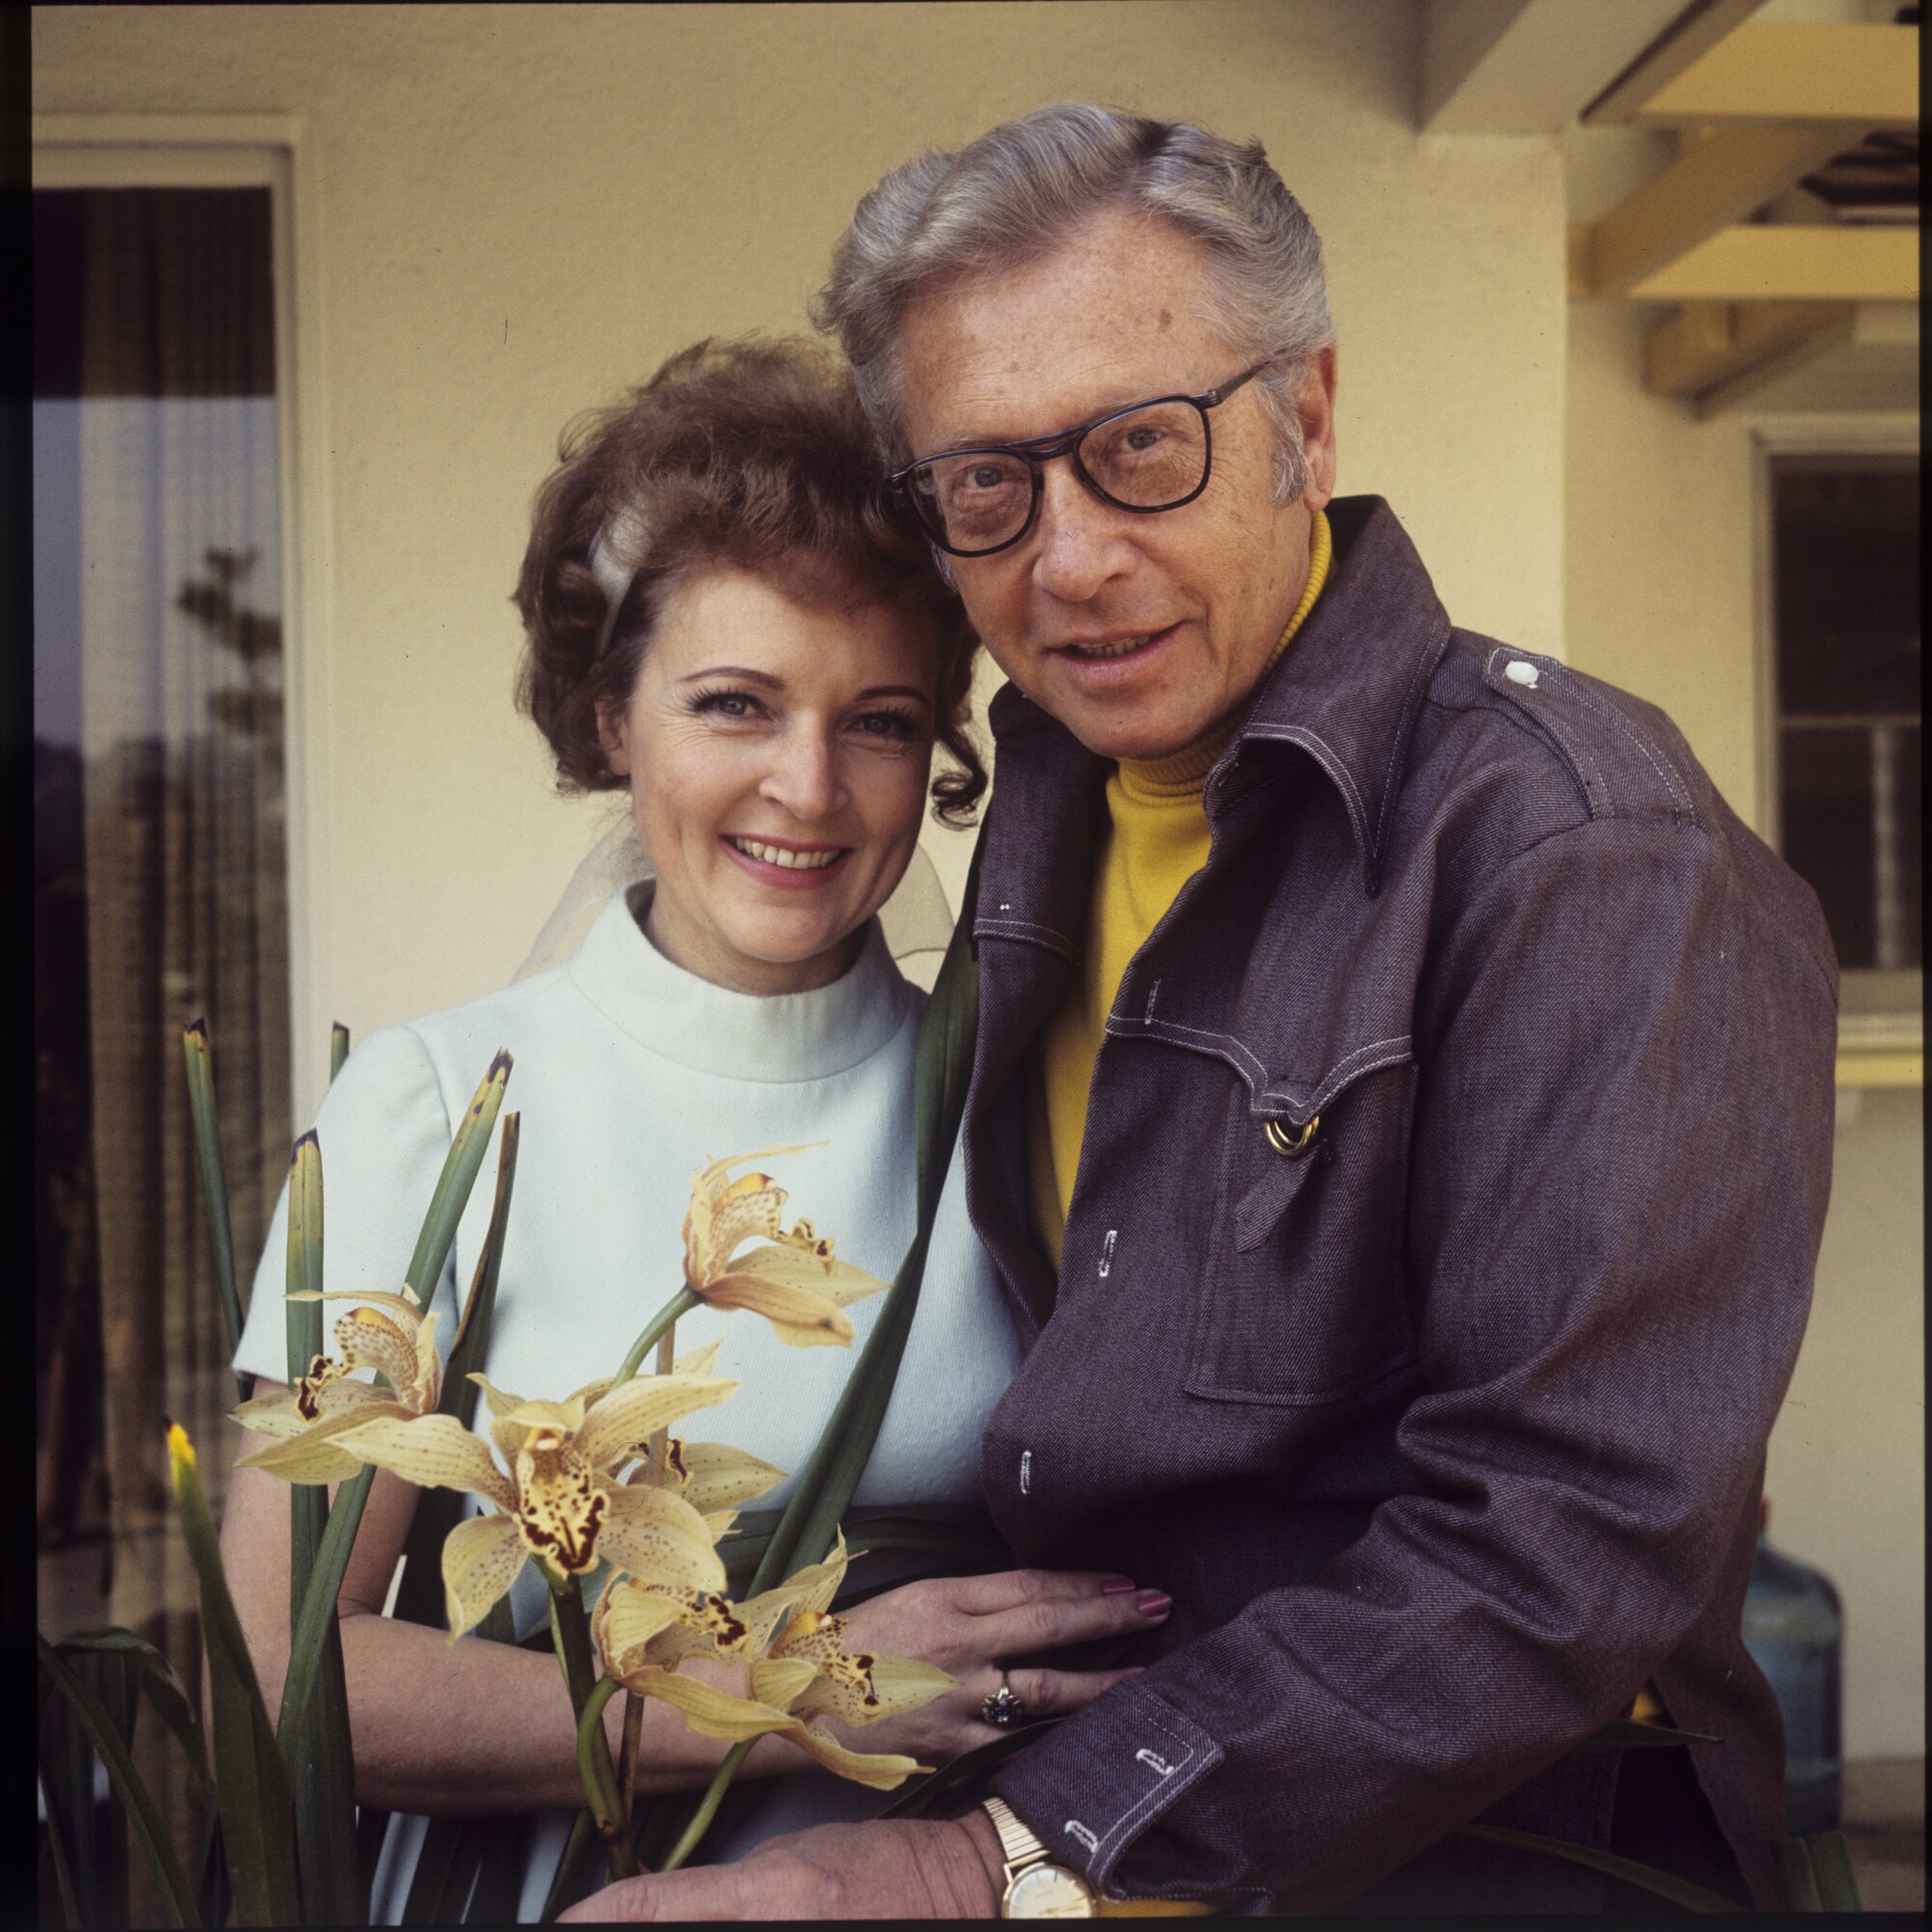 Allen Ludden and Betty White were married for 18 years before dying of cancer at age 63 in 1981. She never remarried.